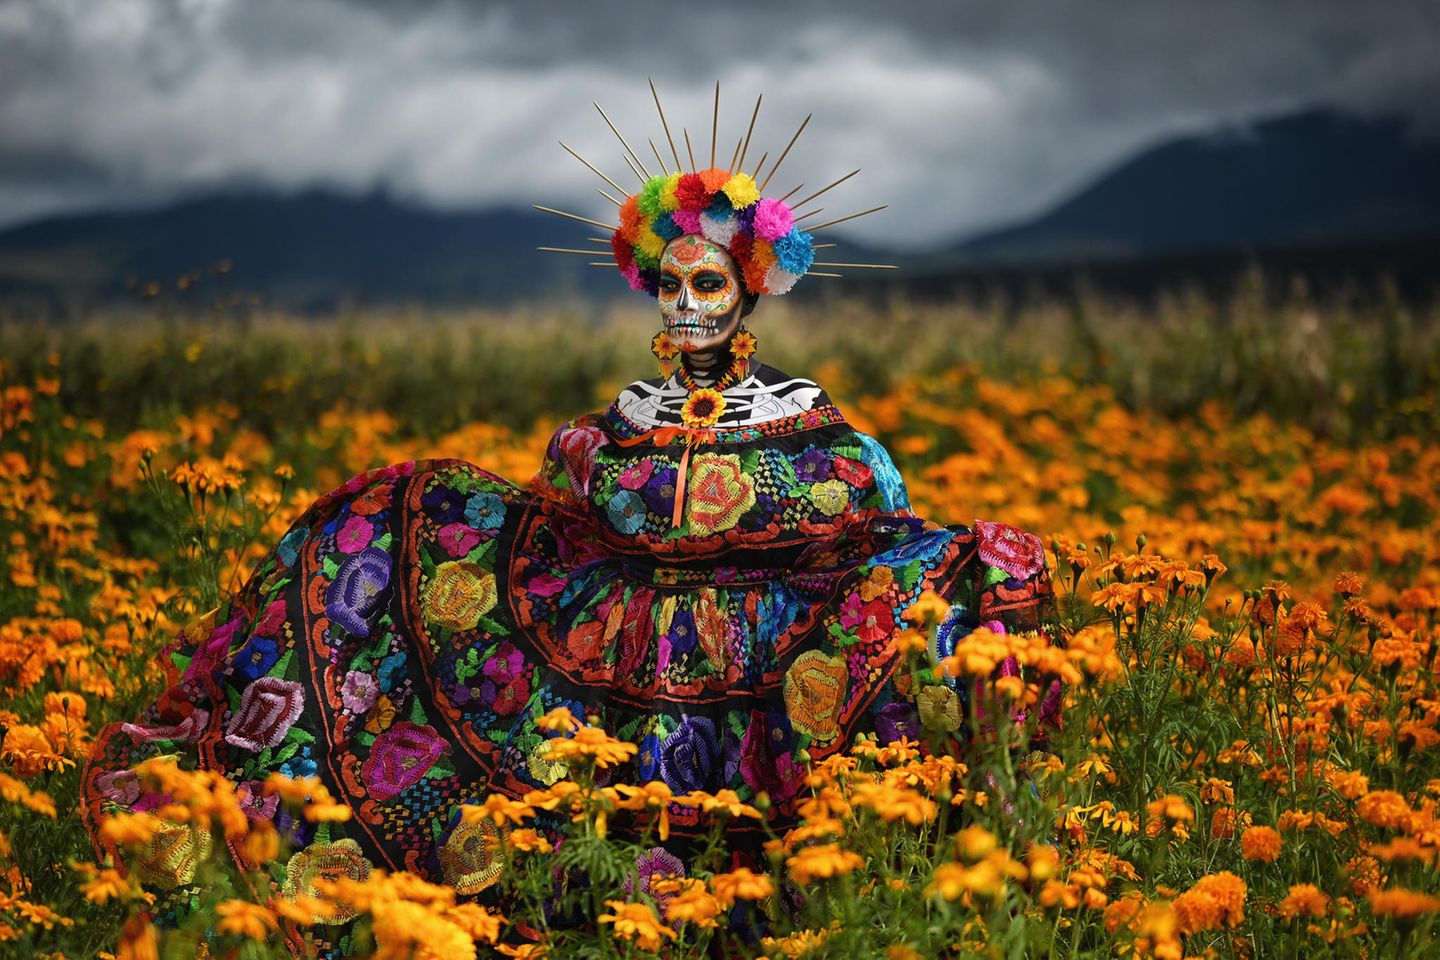 Image Name: The Scent of Cempasúchil  Photographer Name: Sergio Carrasco  Year: 2022  Image Description: <p>Mexican Catrina, an icon of the Day of the Dead, wearing a typical Mexican dress from the state of Chiapas. She is standing in a field of Mexican marigold, or Cempasúchil, a flower traditionally used for Mexican Day of the Dead celebrations. Every year, my wife puts on a different Catrina costume to celebrate our tradition.</p>  Copyright: © Sergio Carrasco, Mexico, Shortlist, National Awards, Portraiture, 2022 Sony World Photography Awards